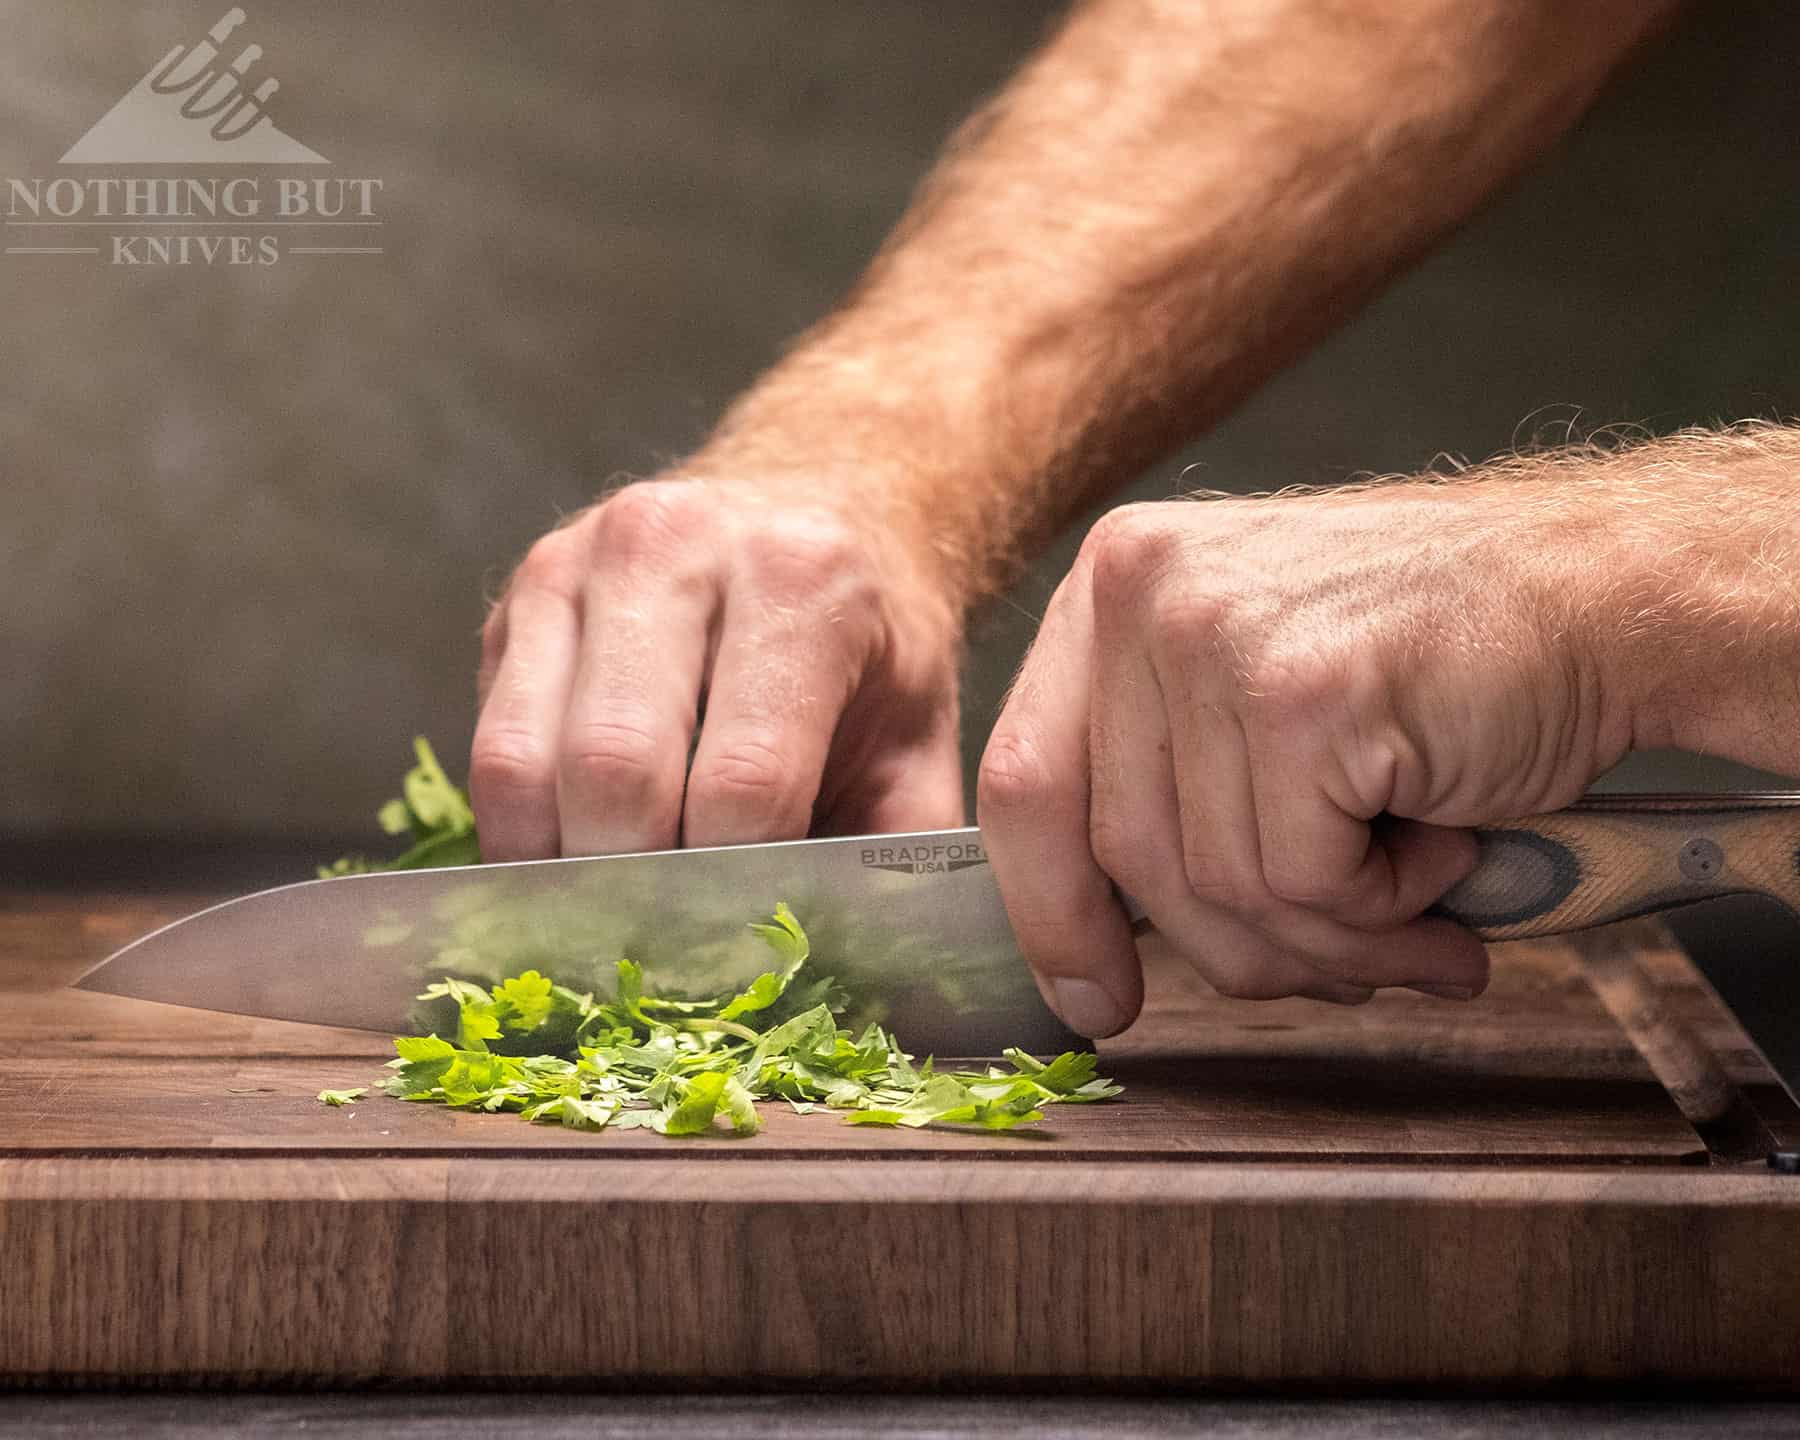 The thin blade of the Bradford chef knife did a great job of dicing cilantro. 